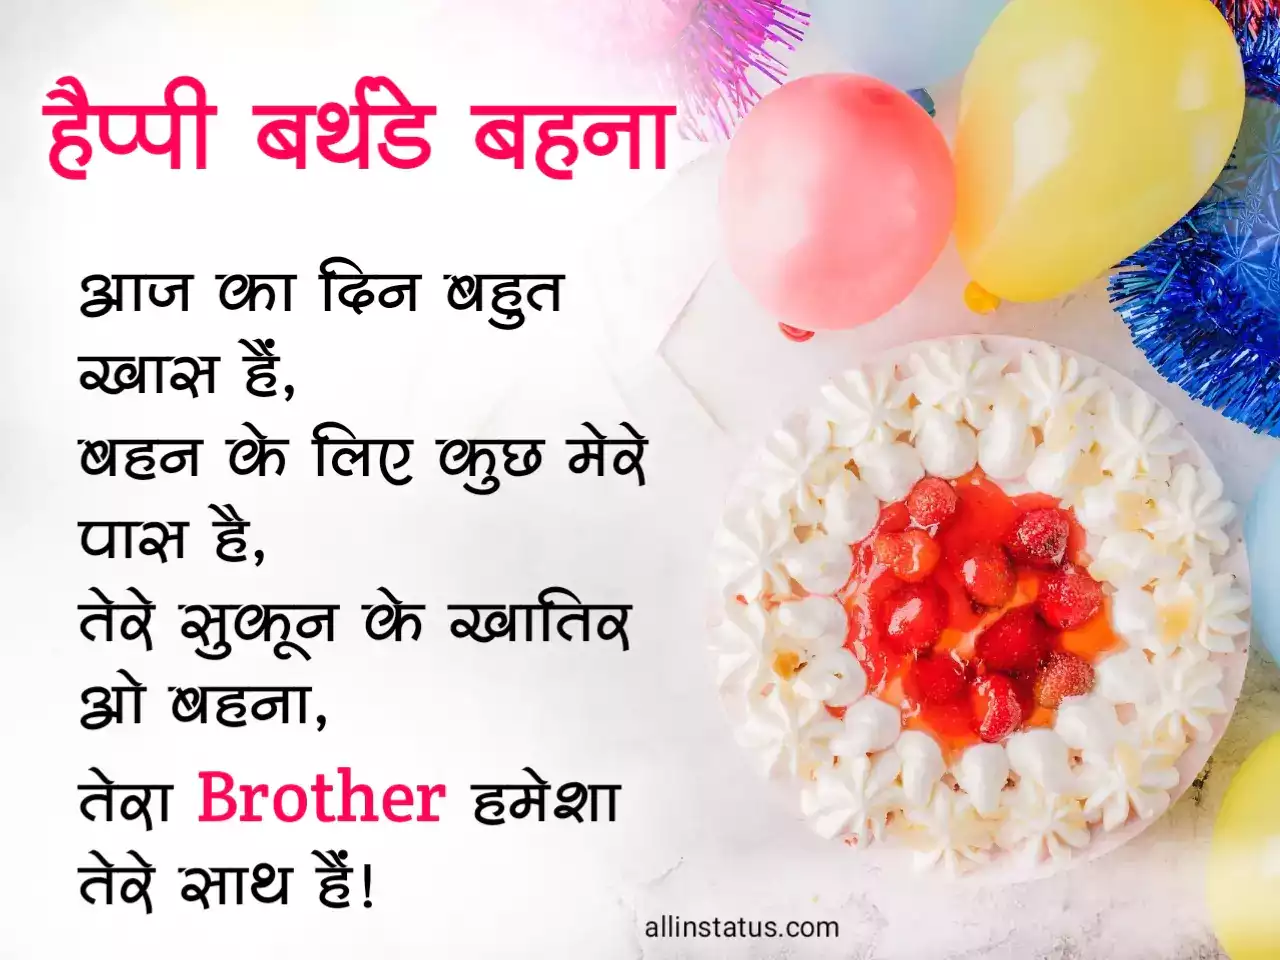 Happy birthday images for sister in hindi